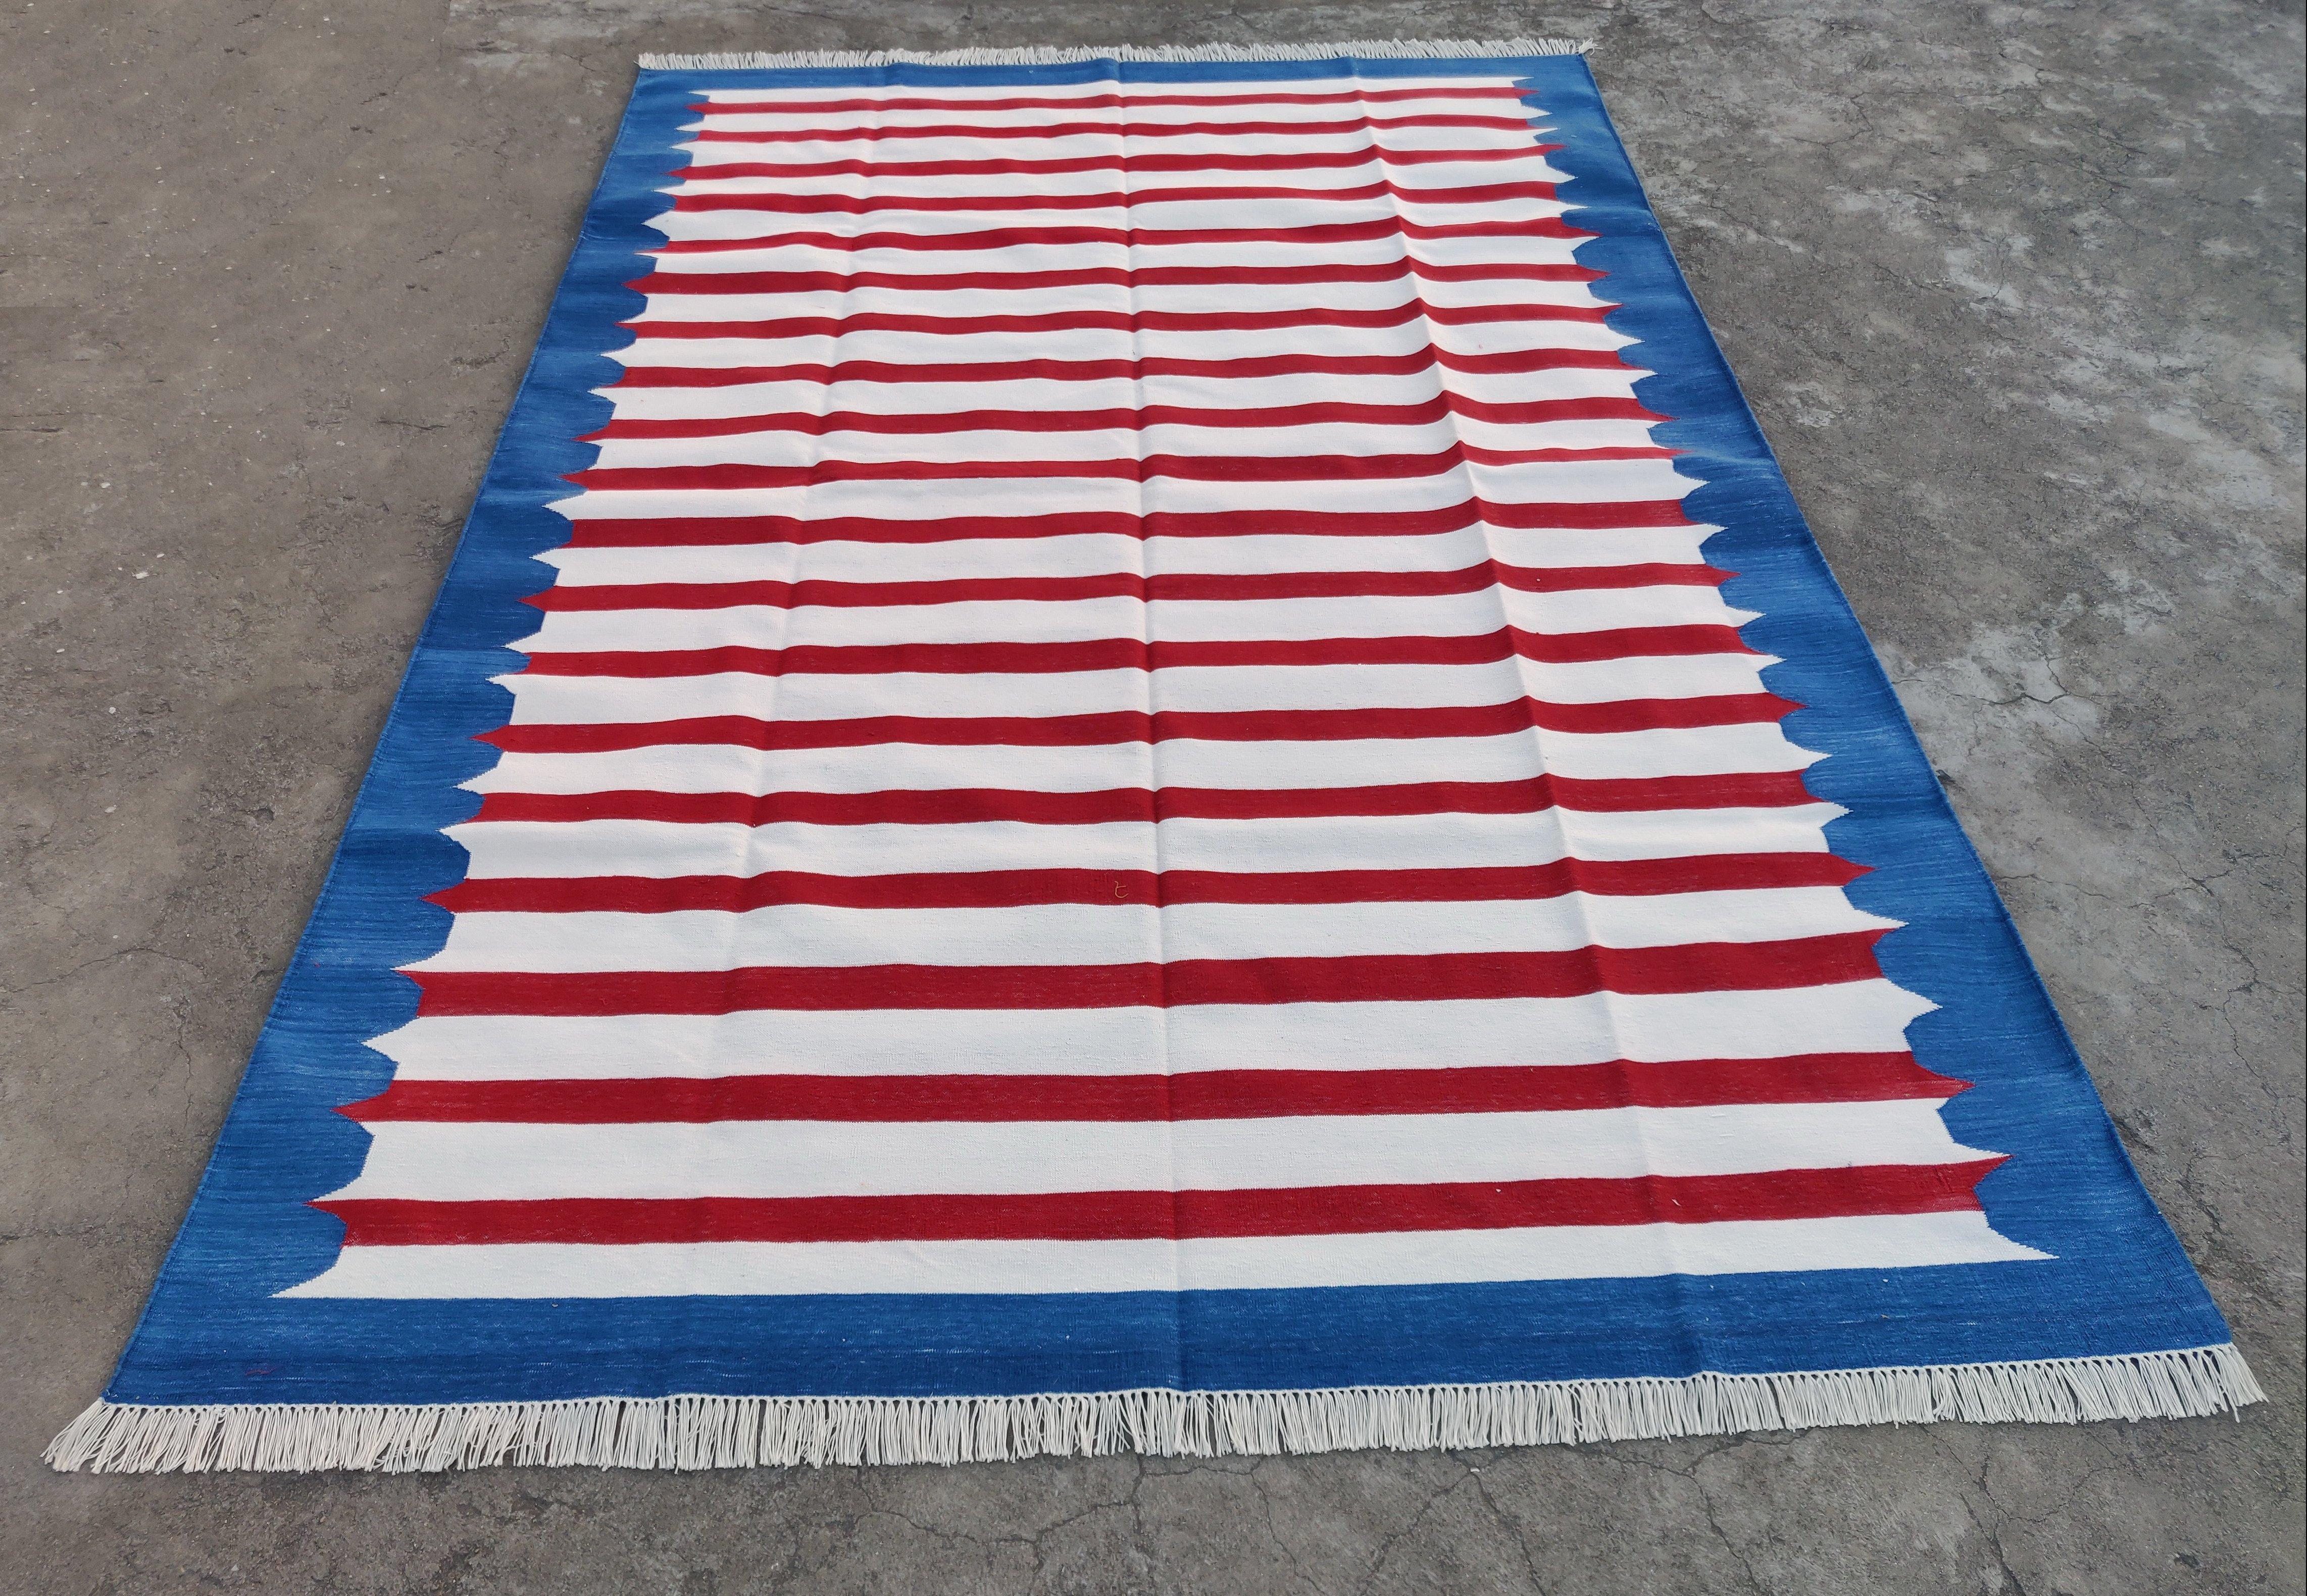 Contemporary Handmade Cotton Area Flat Weave Rug, 6x9 Blue And Red Striped Indian Dhurrie Rug For Sale